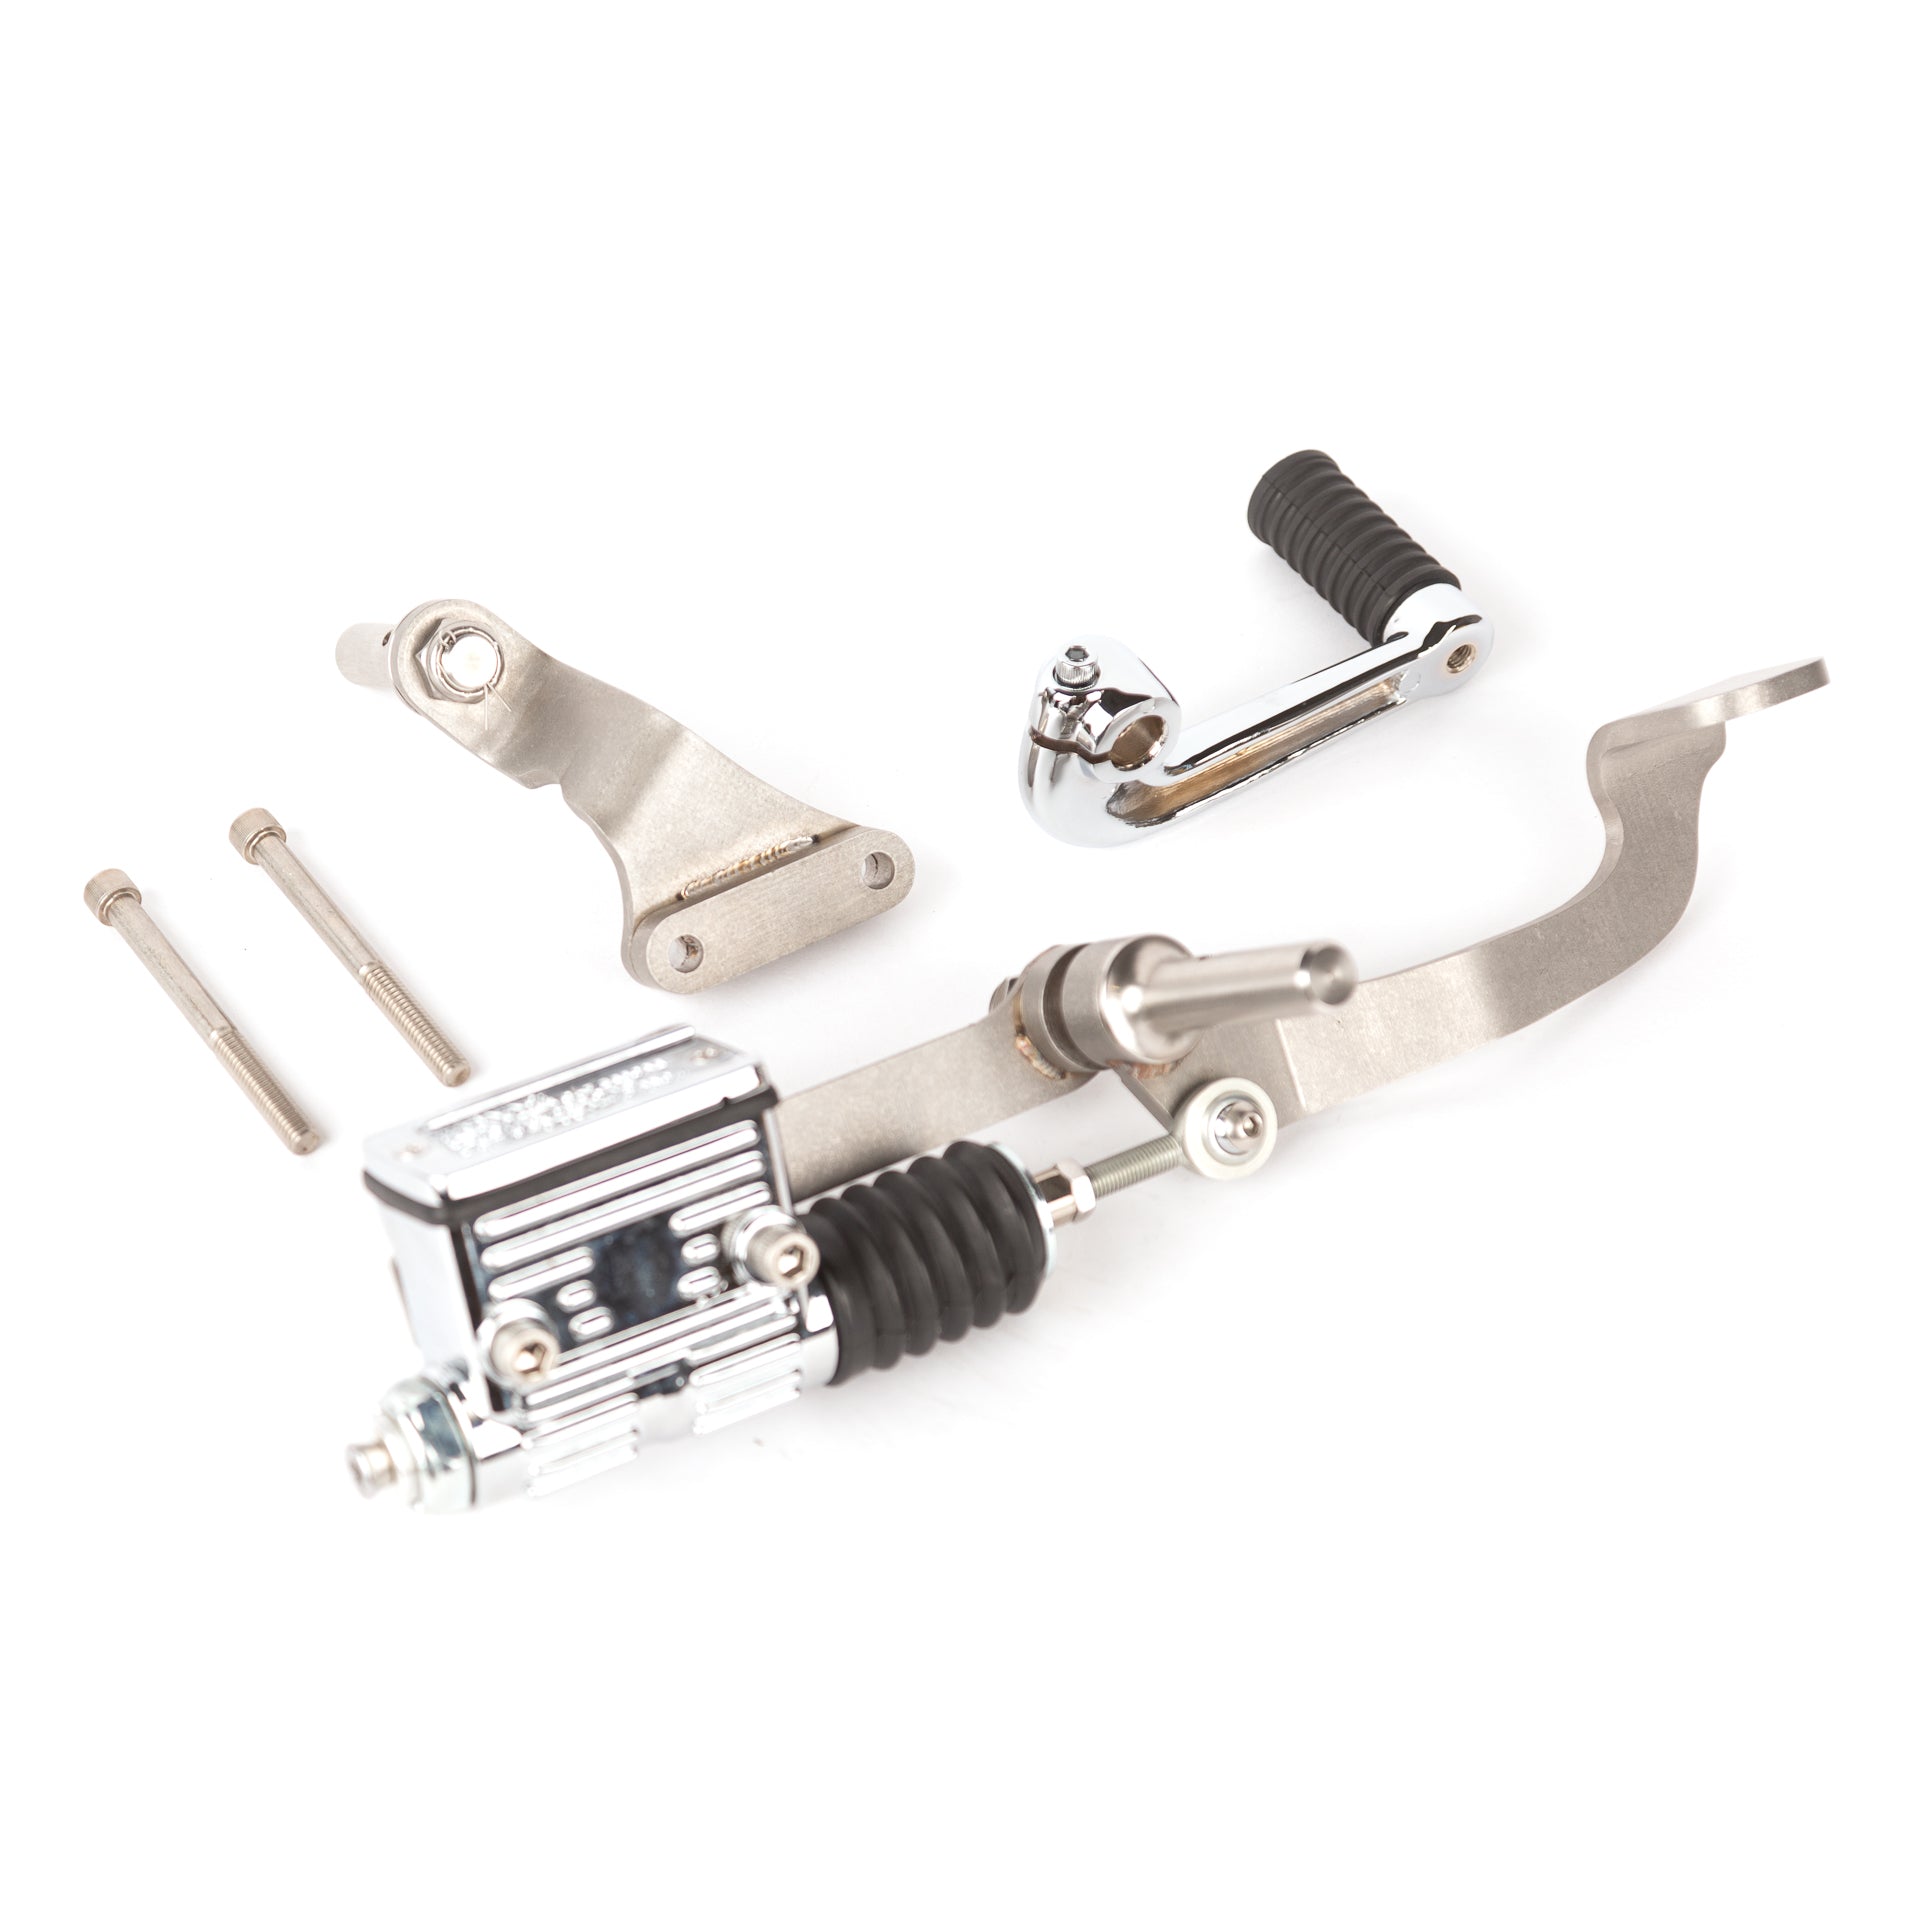 Sportster Mid-Control Kit 1991-2003 – Prism Supply